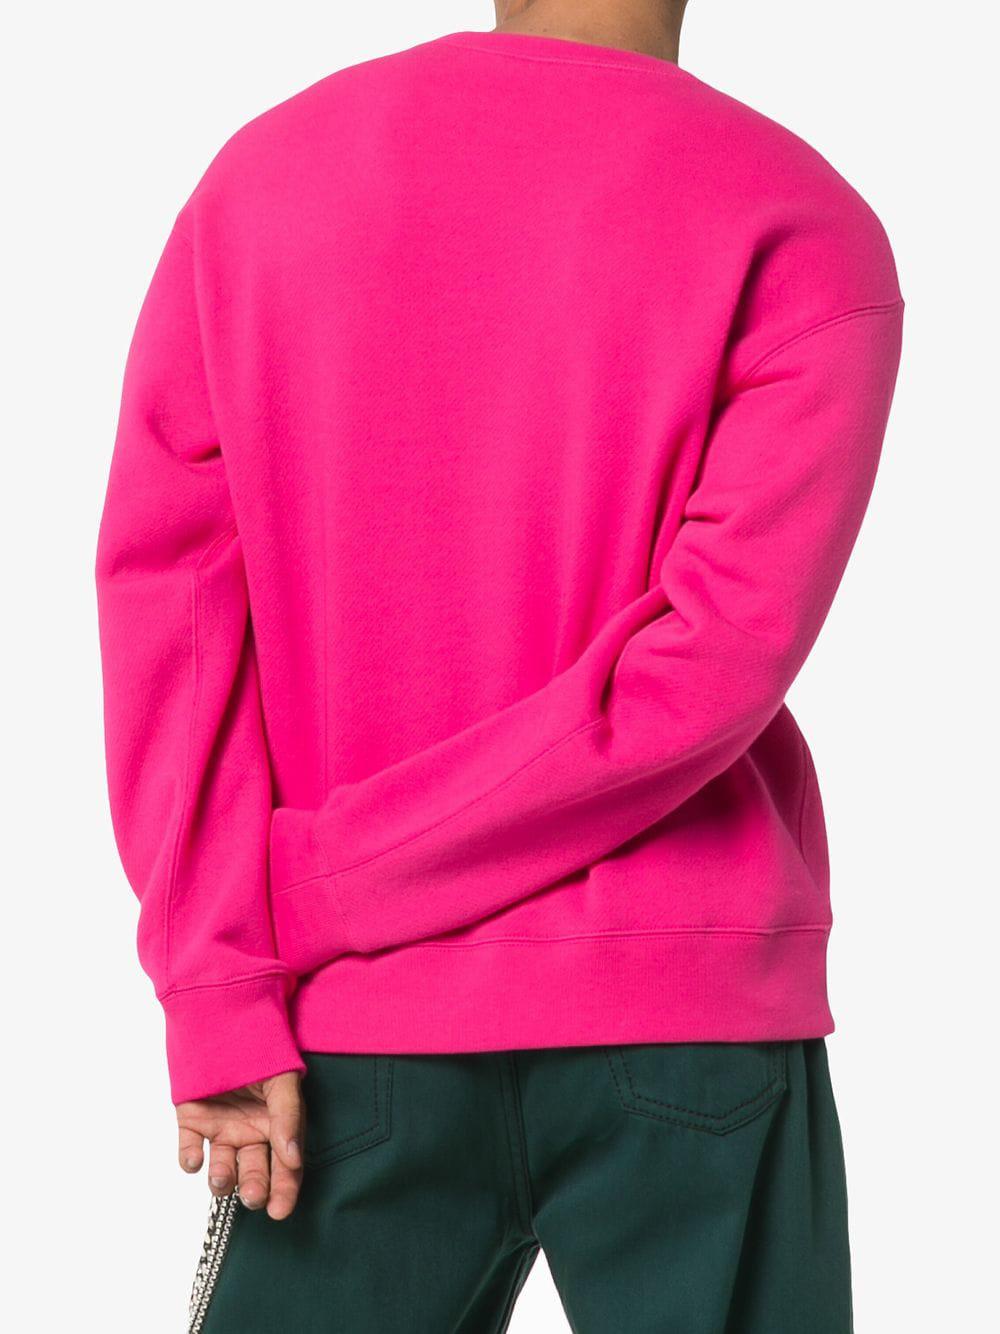 Gucci Sweatshirt With '80s Patch in Pink for Men - Lyst